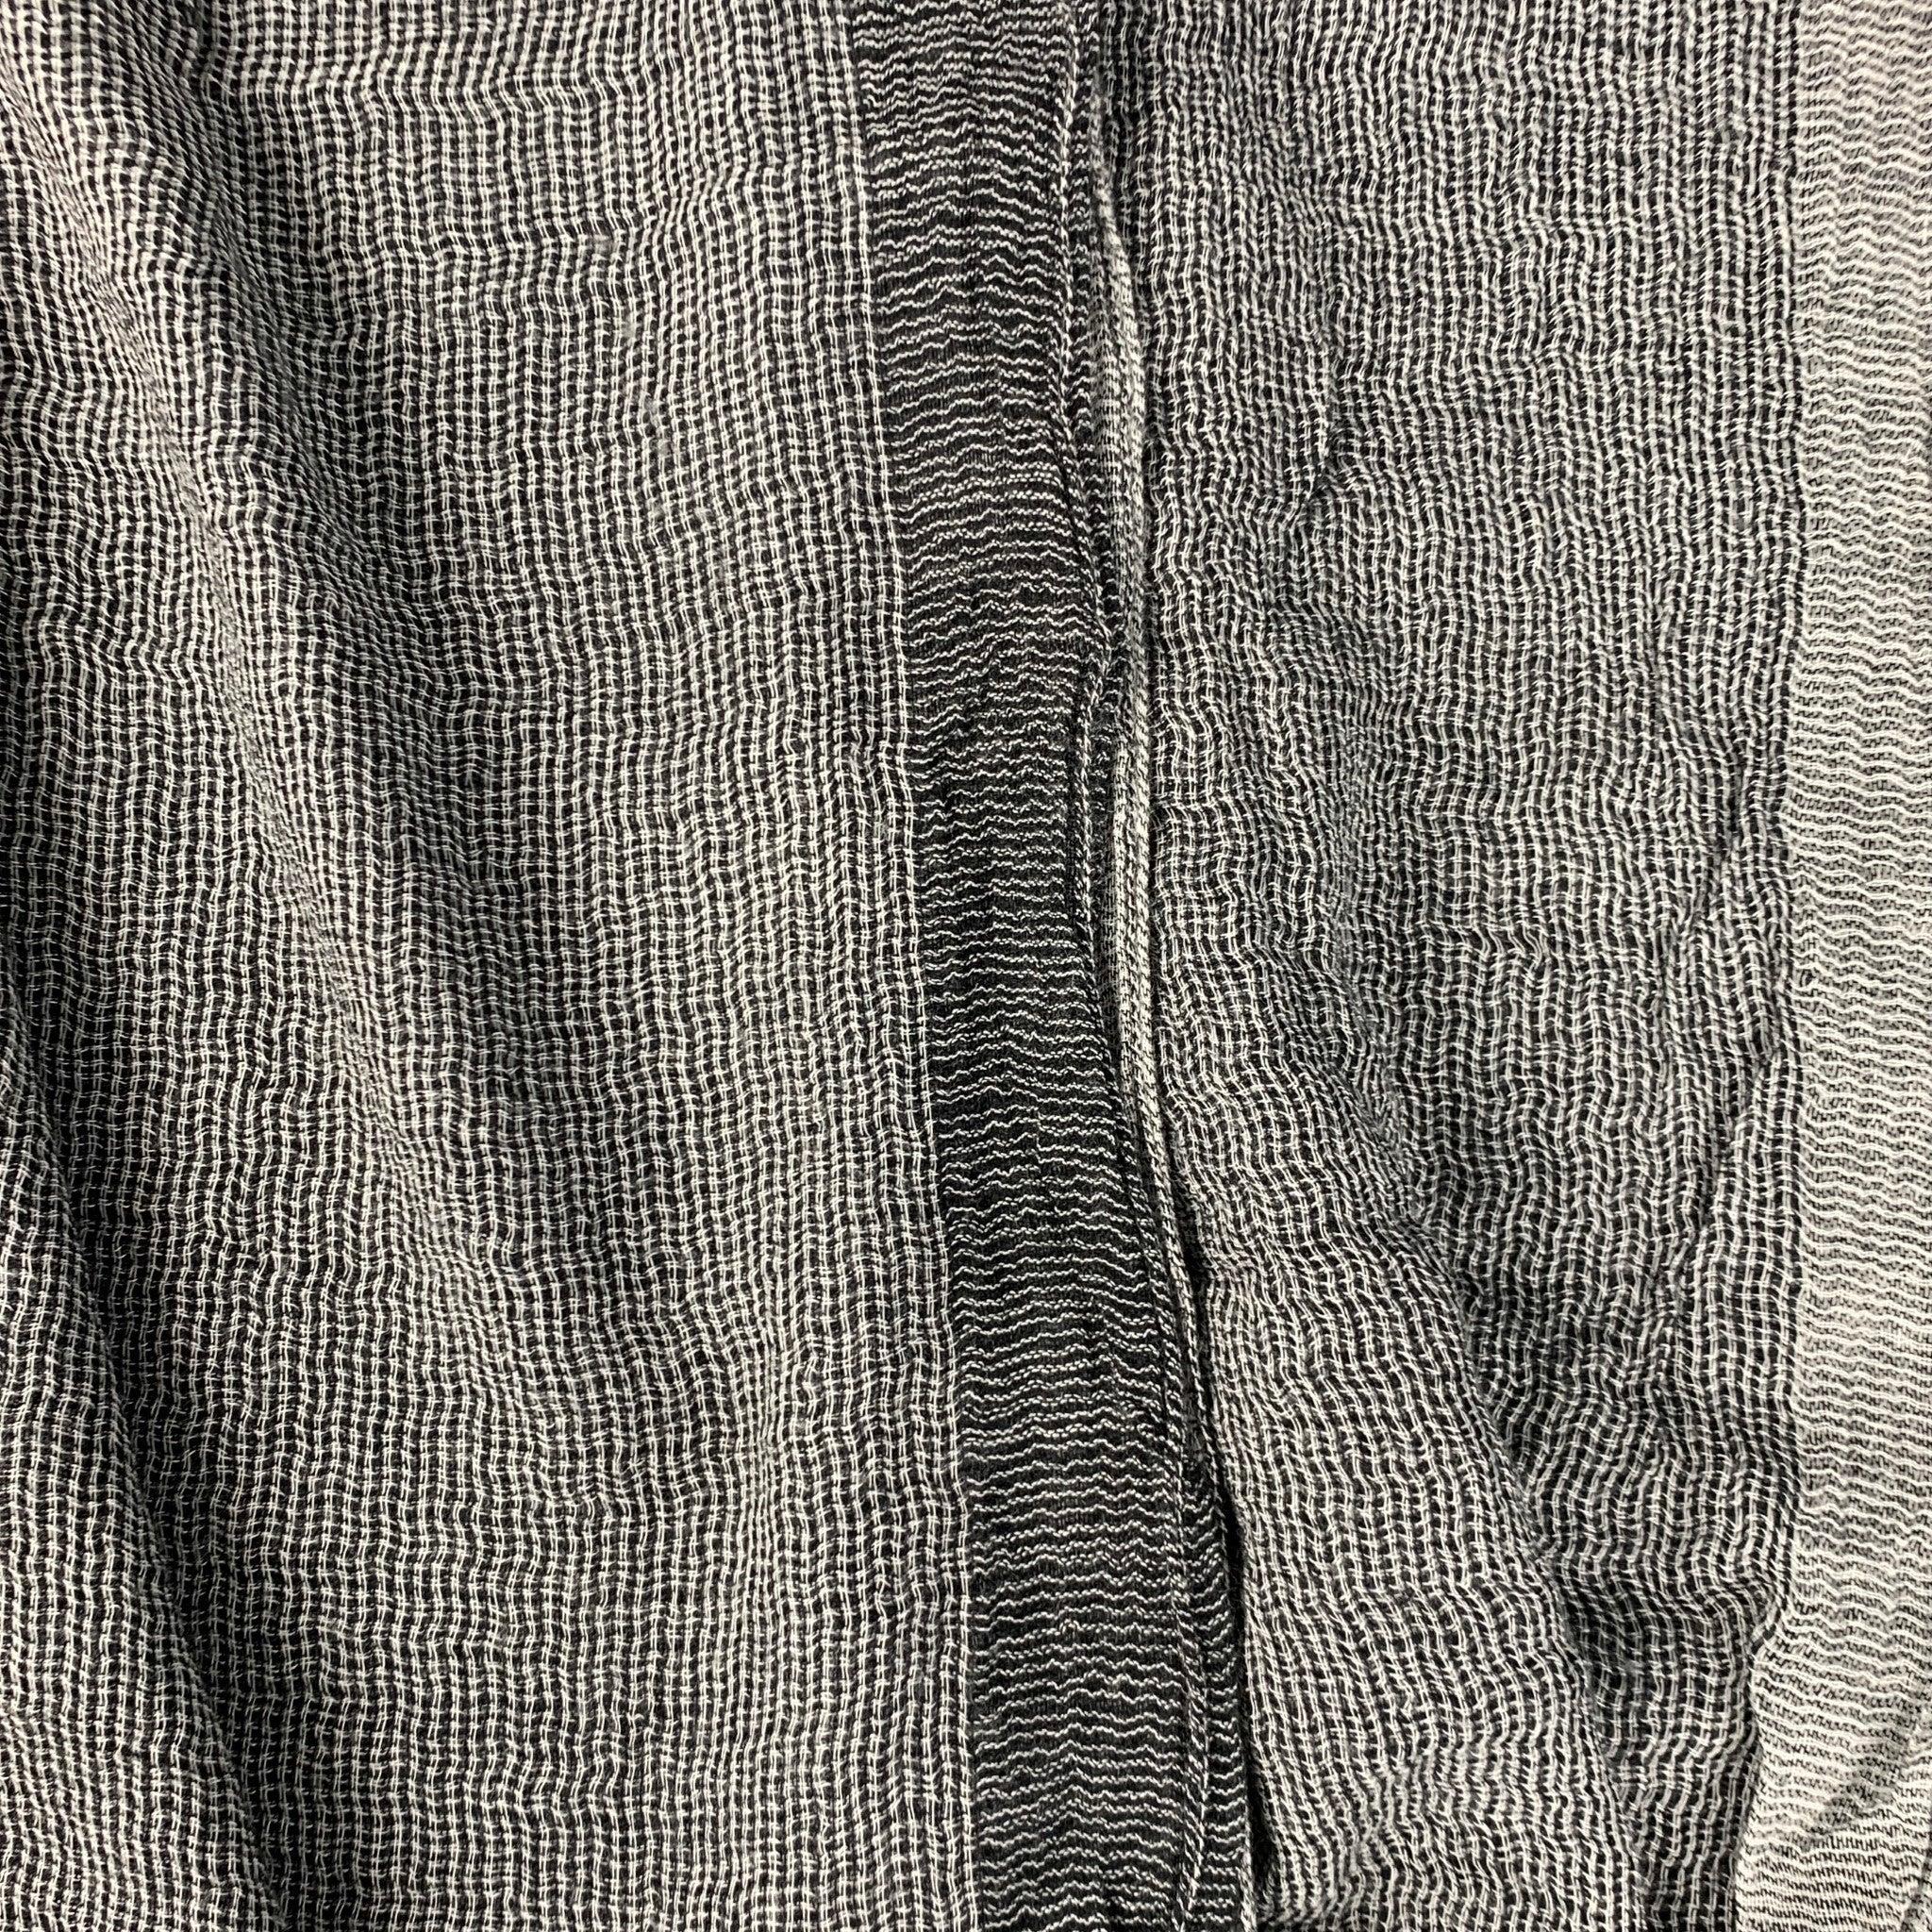 JOHN VARVATOS scarf
in a soft black and white viscose modal blend scarf featuring raw edge and a monochromatic color block style. Made in Italy. Very Good Pre-Owned Condition. Minor signs of wear. 

Measurements: 
  70 inches  x 12.5 inches 
  
  
